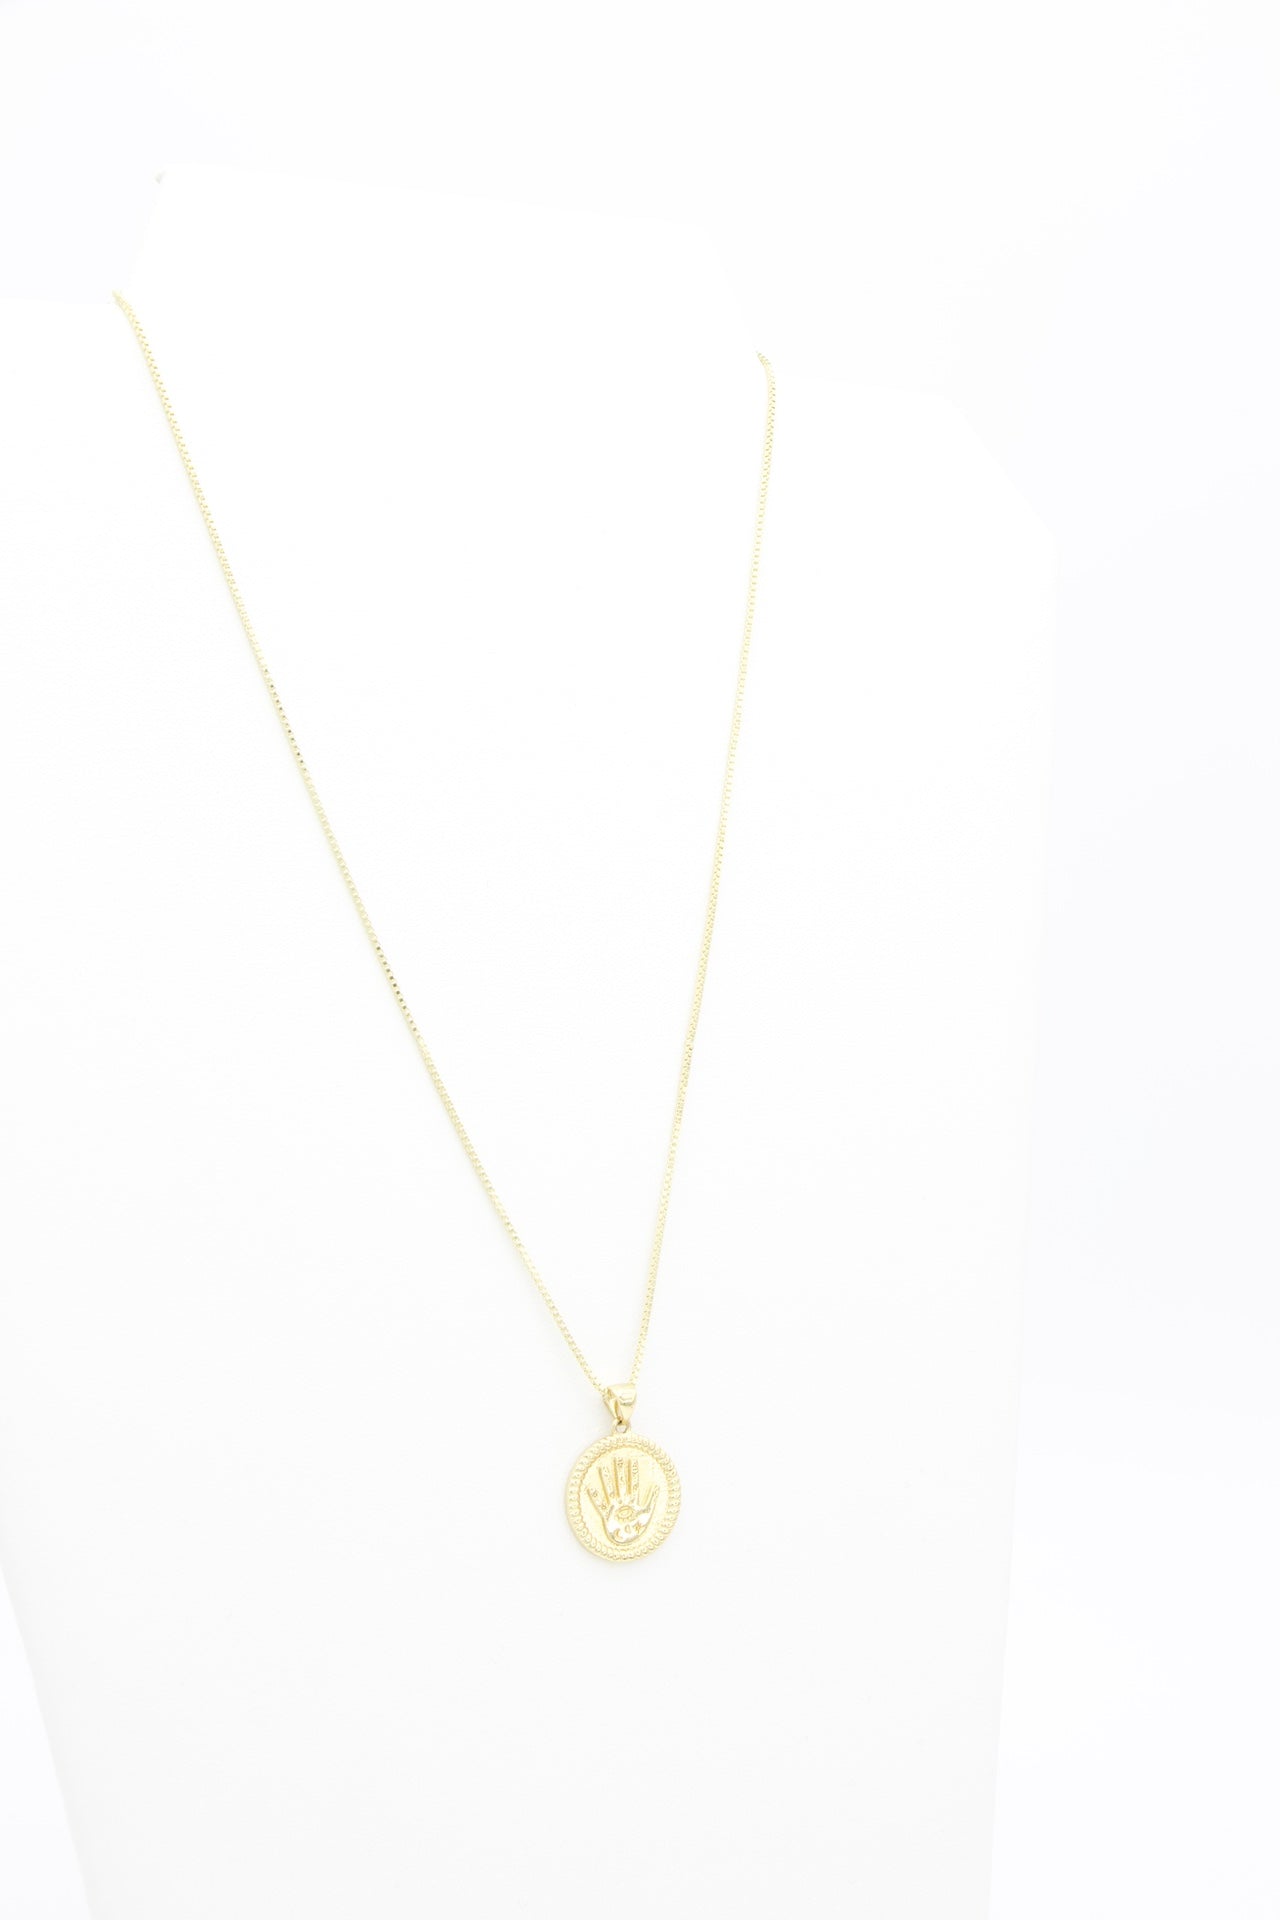 AW Boutique's gold filled 18 inch box chain with a vintage looking Hamsa coin pendant. The Hamsa has small inscriptions and an evil eye on the hand. Pendant has rope effect edging. Part of Protection collection. Gold filled jewellery.